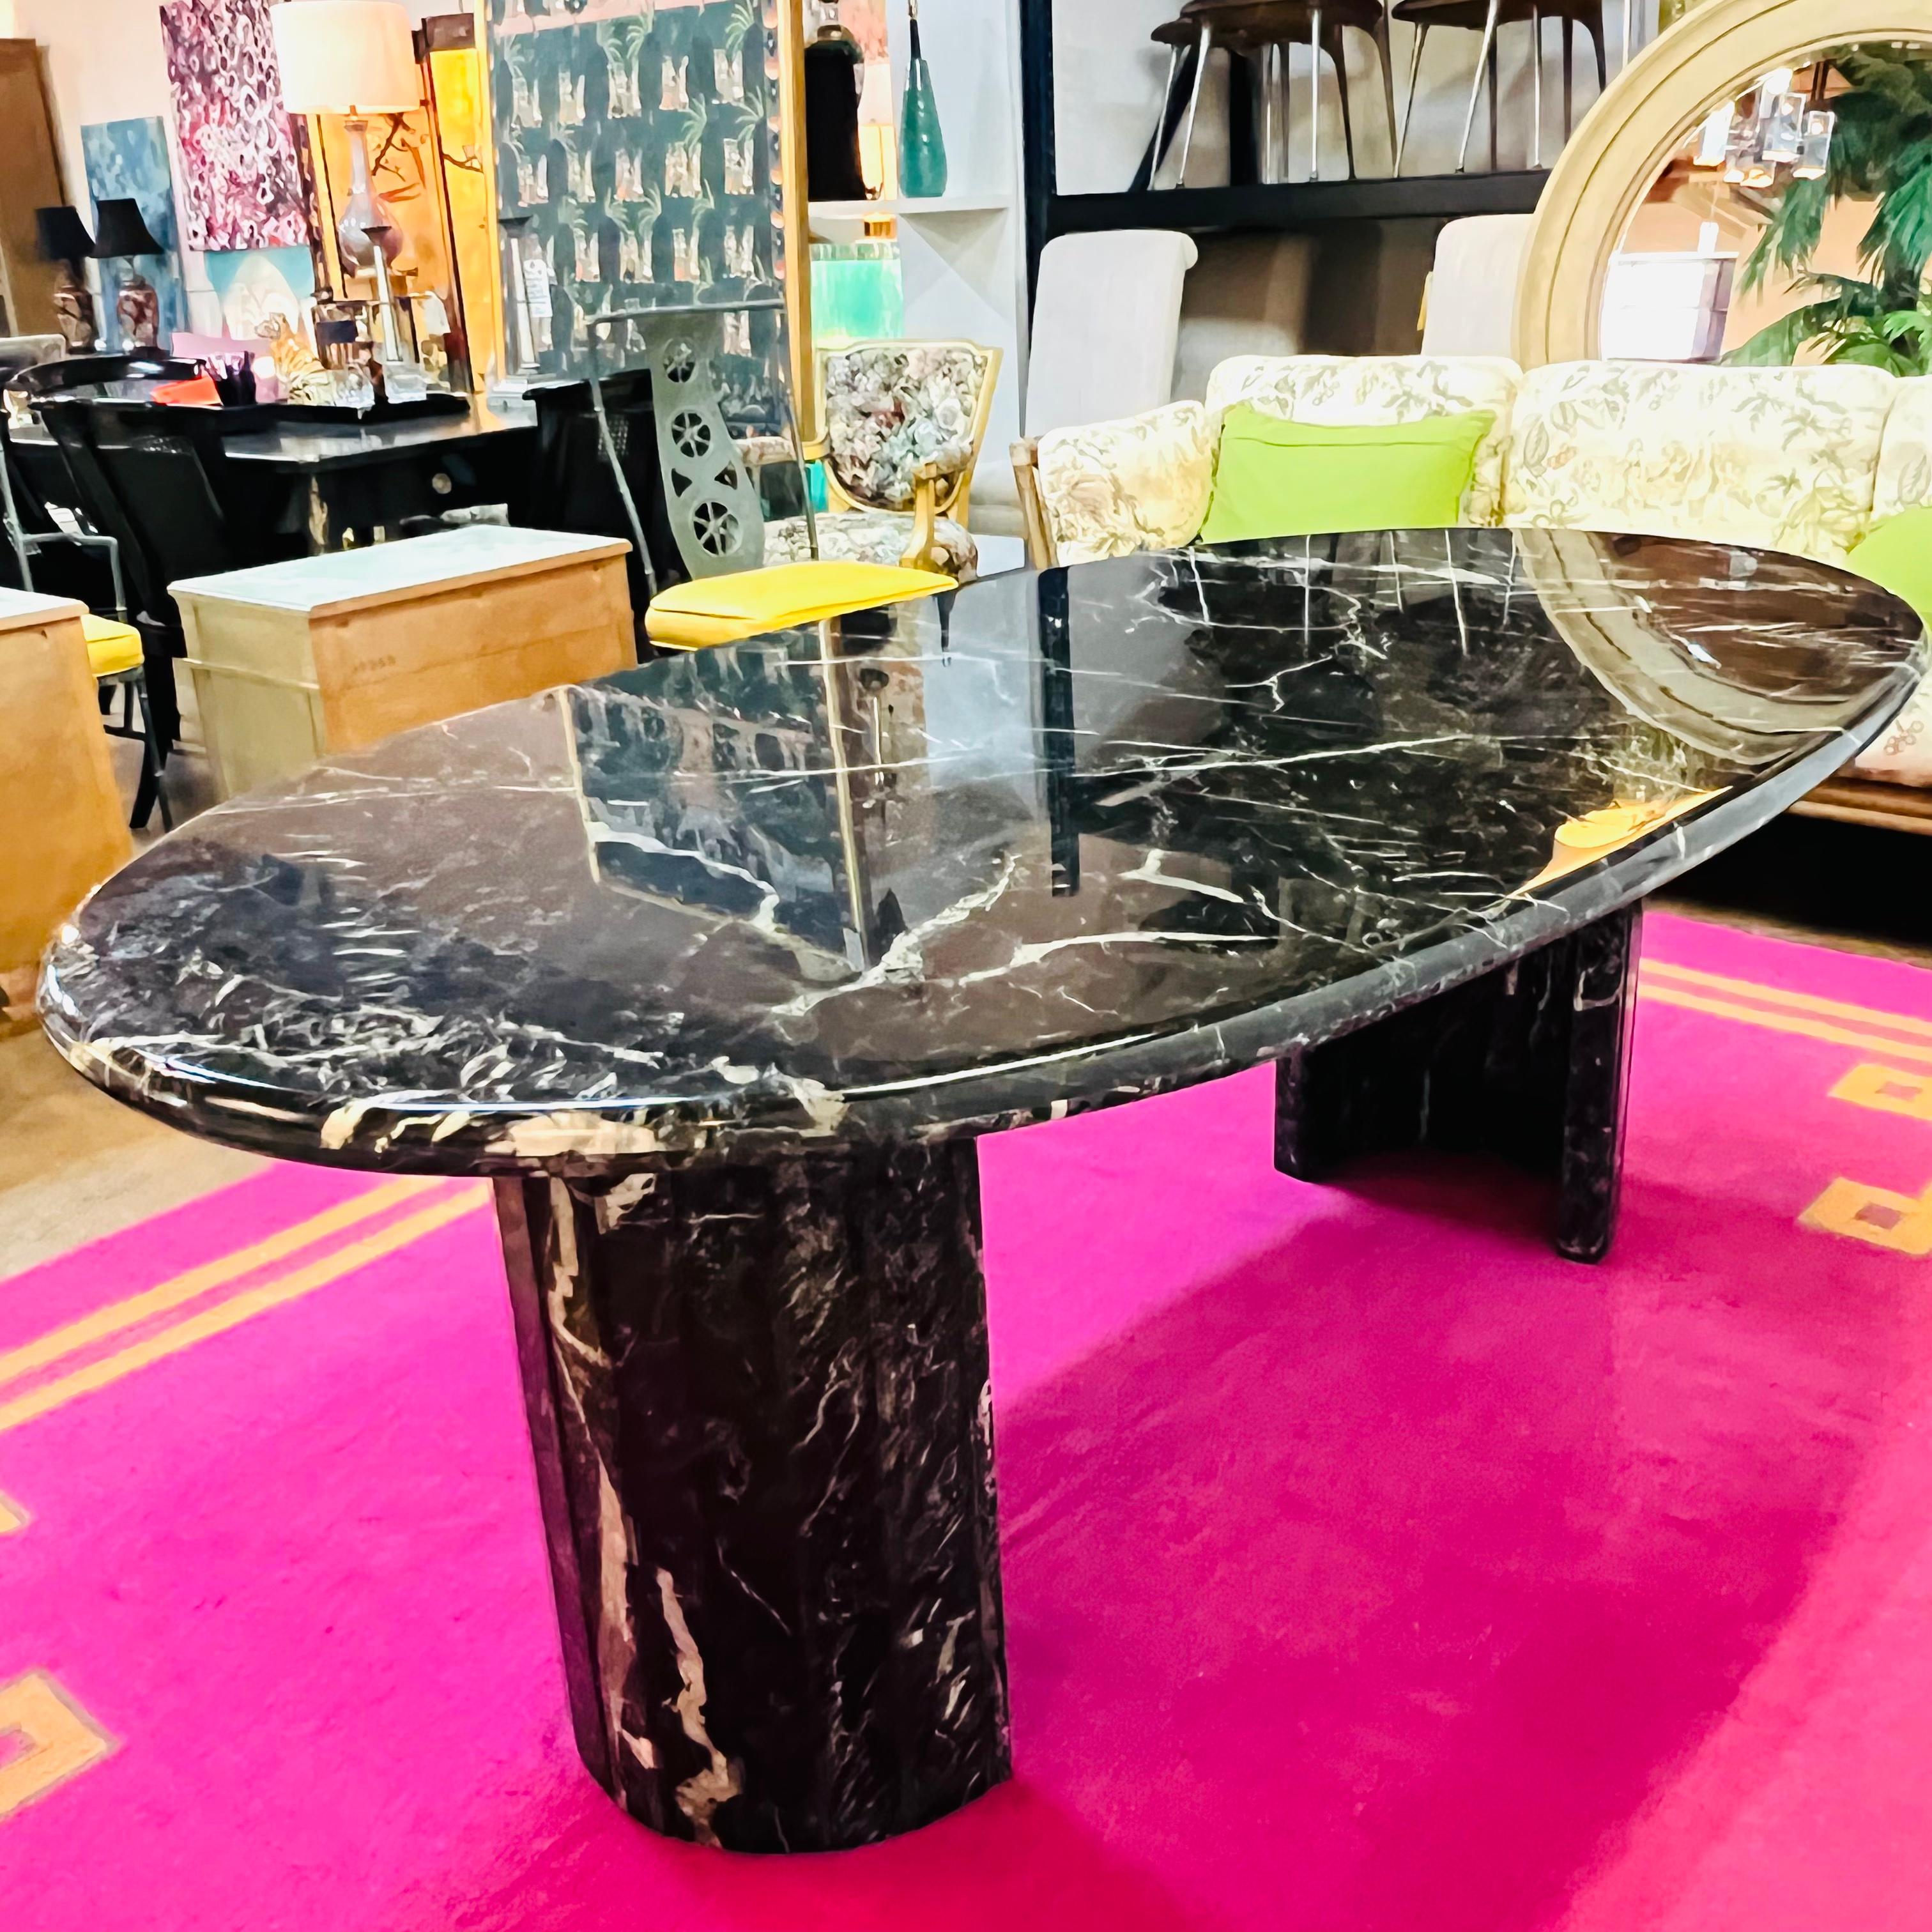 Stunning black marble from top to bottom, this Neoclassical dining table is the ultimate statement piece. A reimagining of the classic double pedestal table, this luxurious piece features two demi-lune beveled pillar legs and a 74